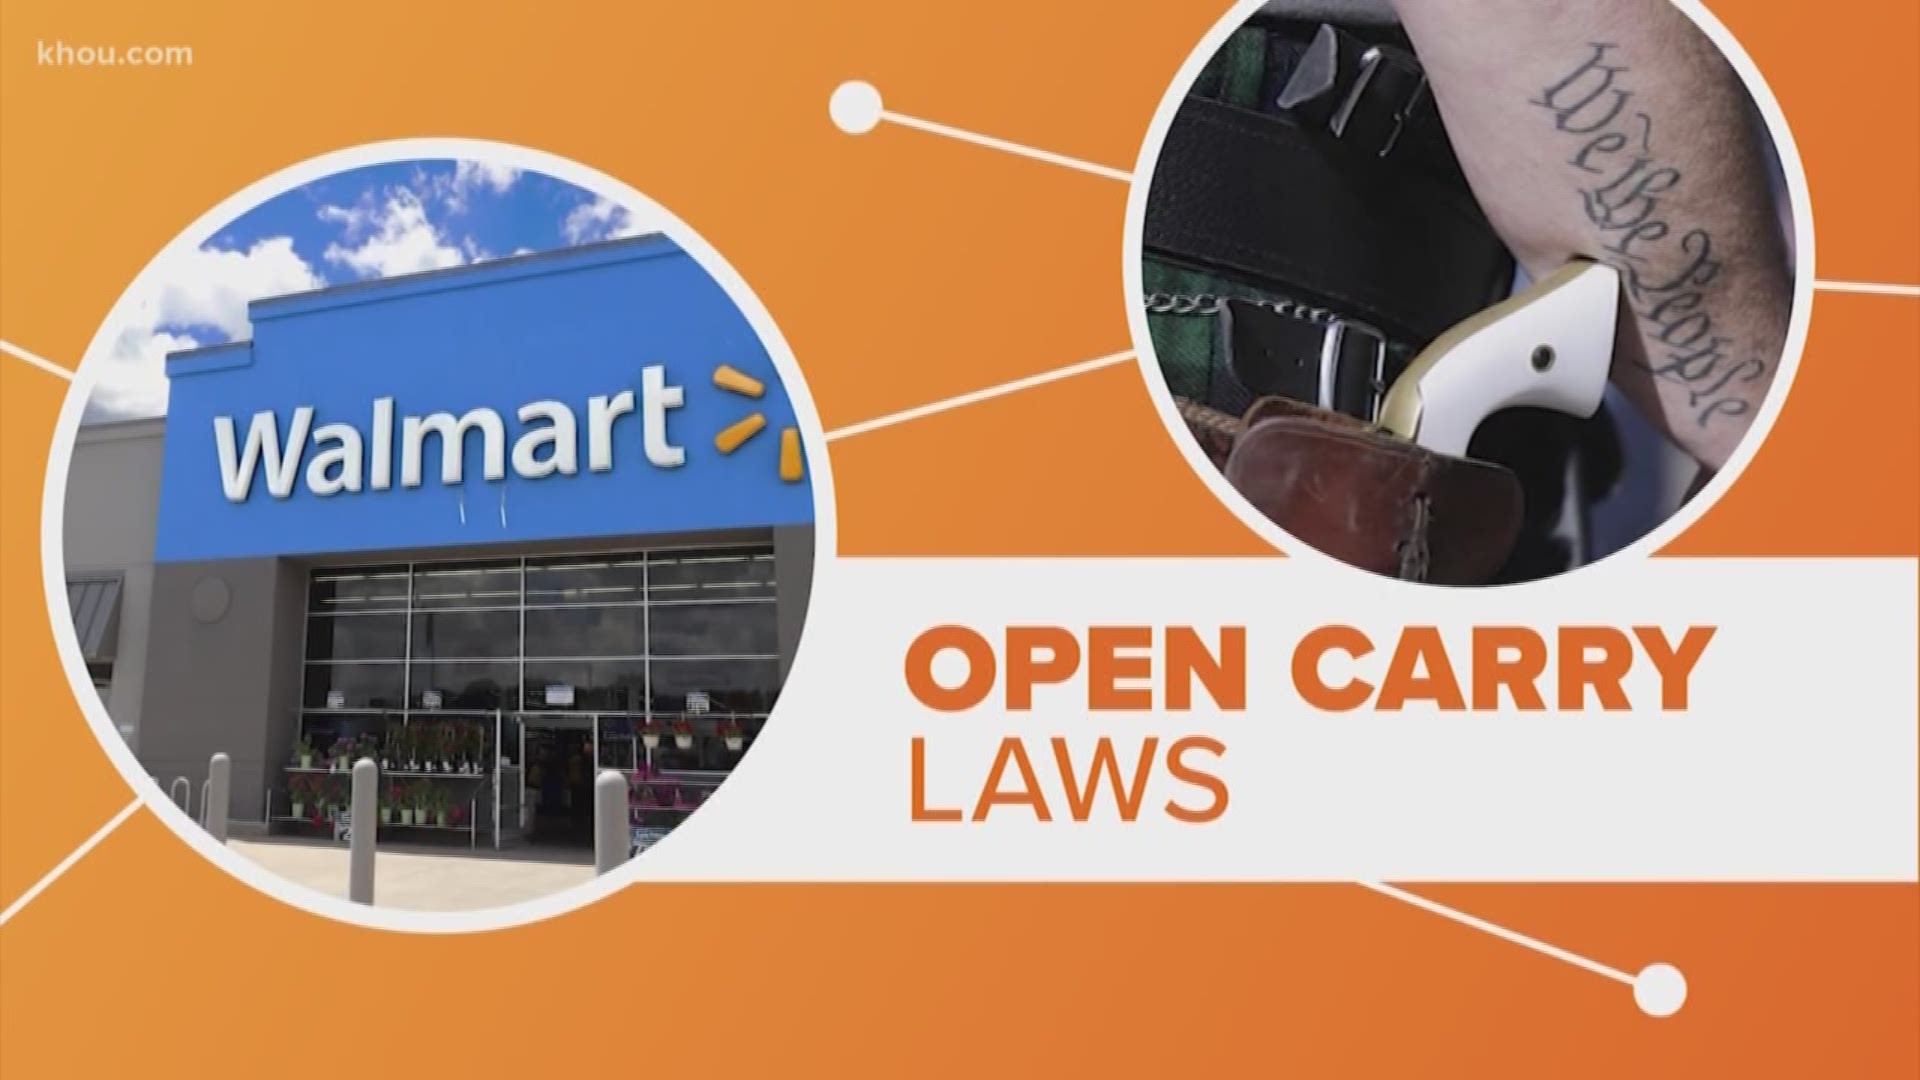 All morning, we've told you about Walmart’s open carry and gun sales policies. But it's not the first company to take a stand on the issue. Marcelino Benito connects the dots.